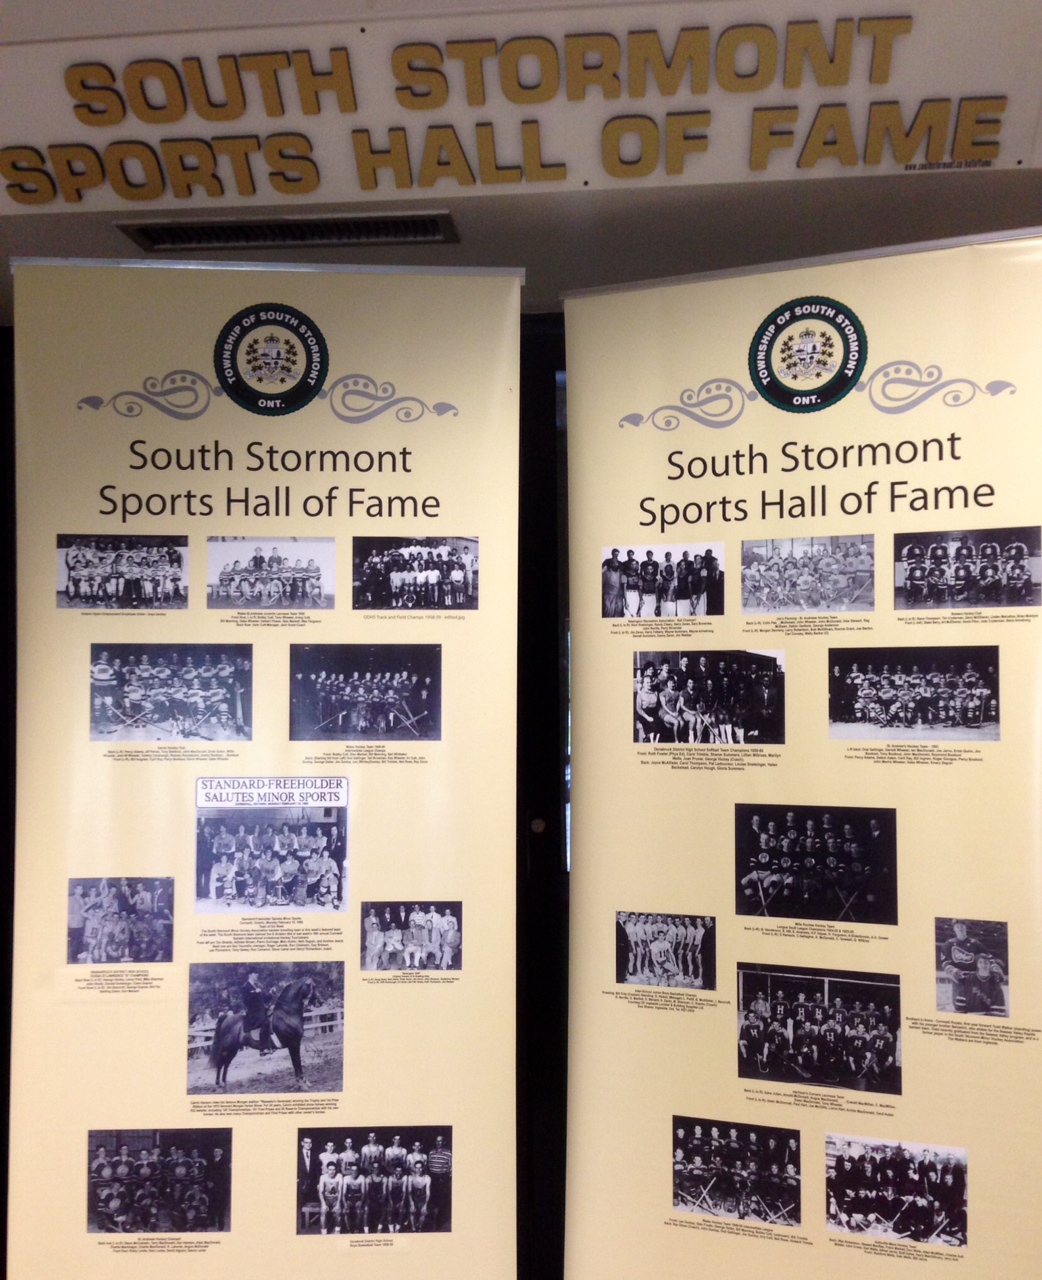 Nine new faces for South Stormont Sports Hall of Fame